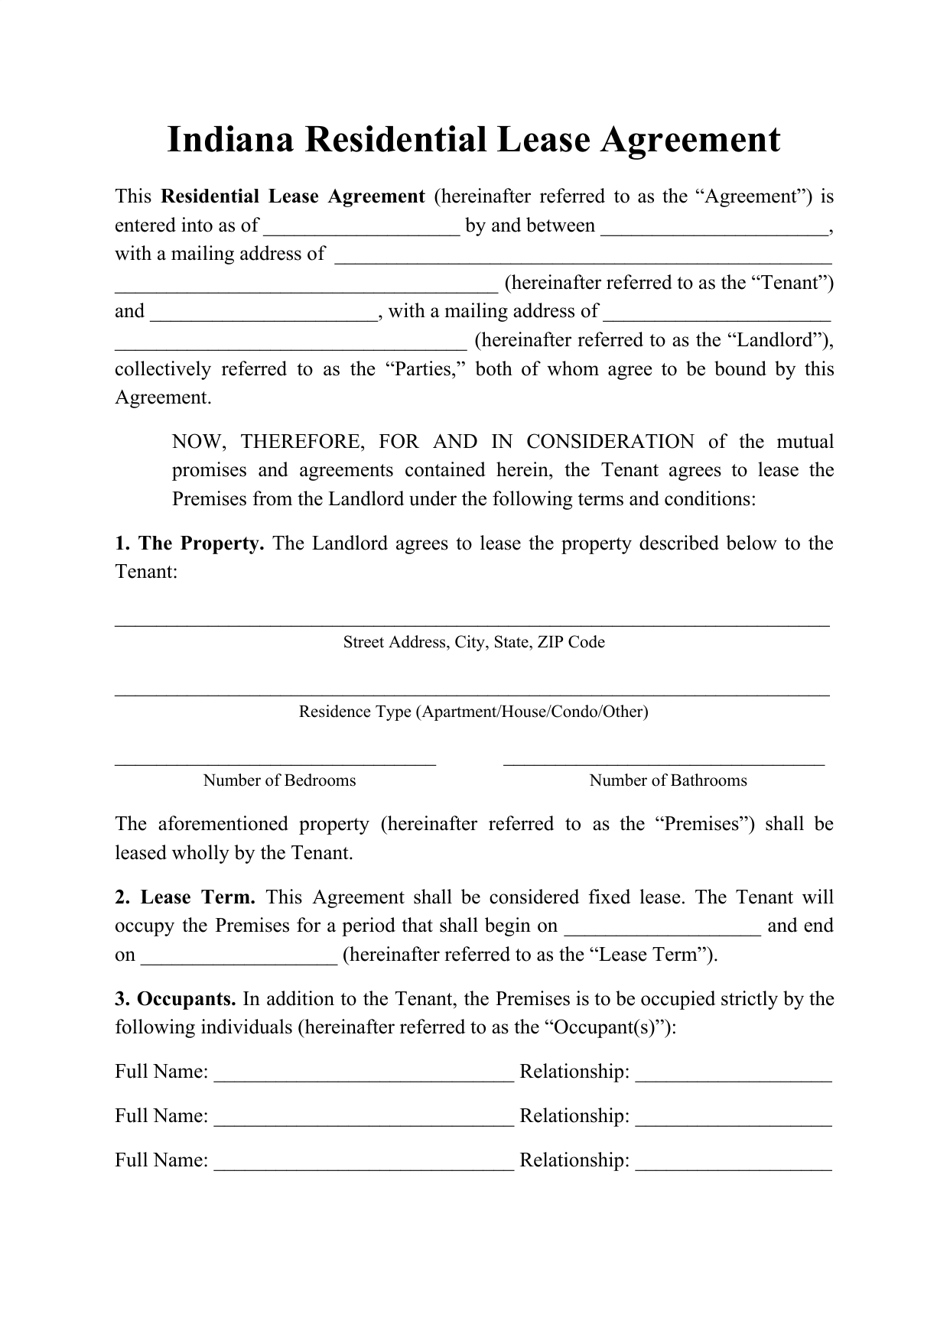 indiana residential lease agreement template download